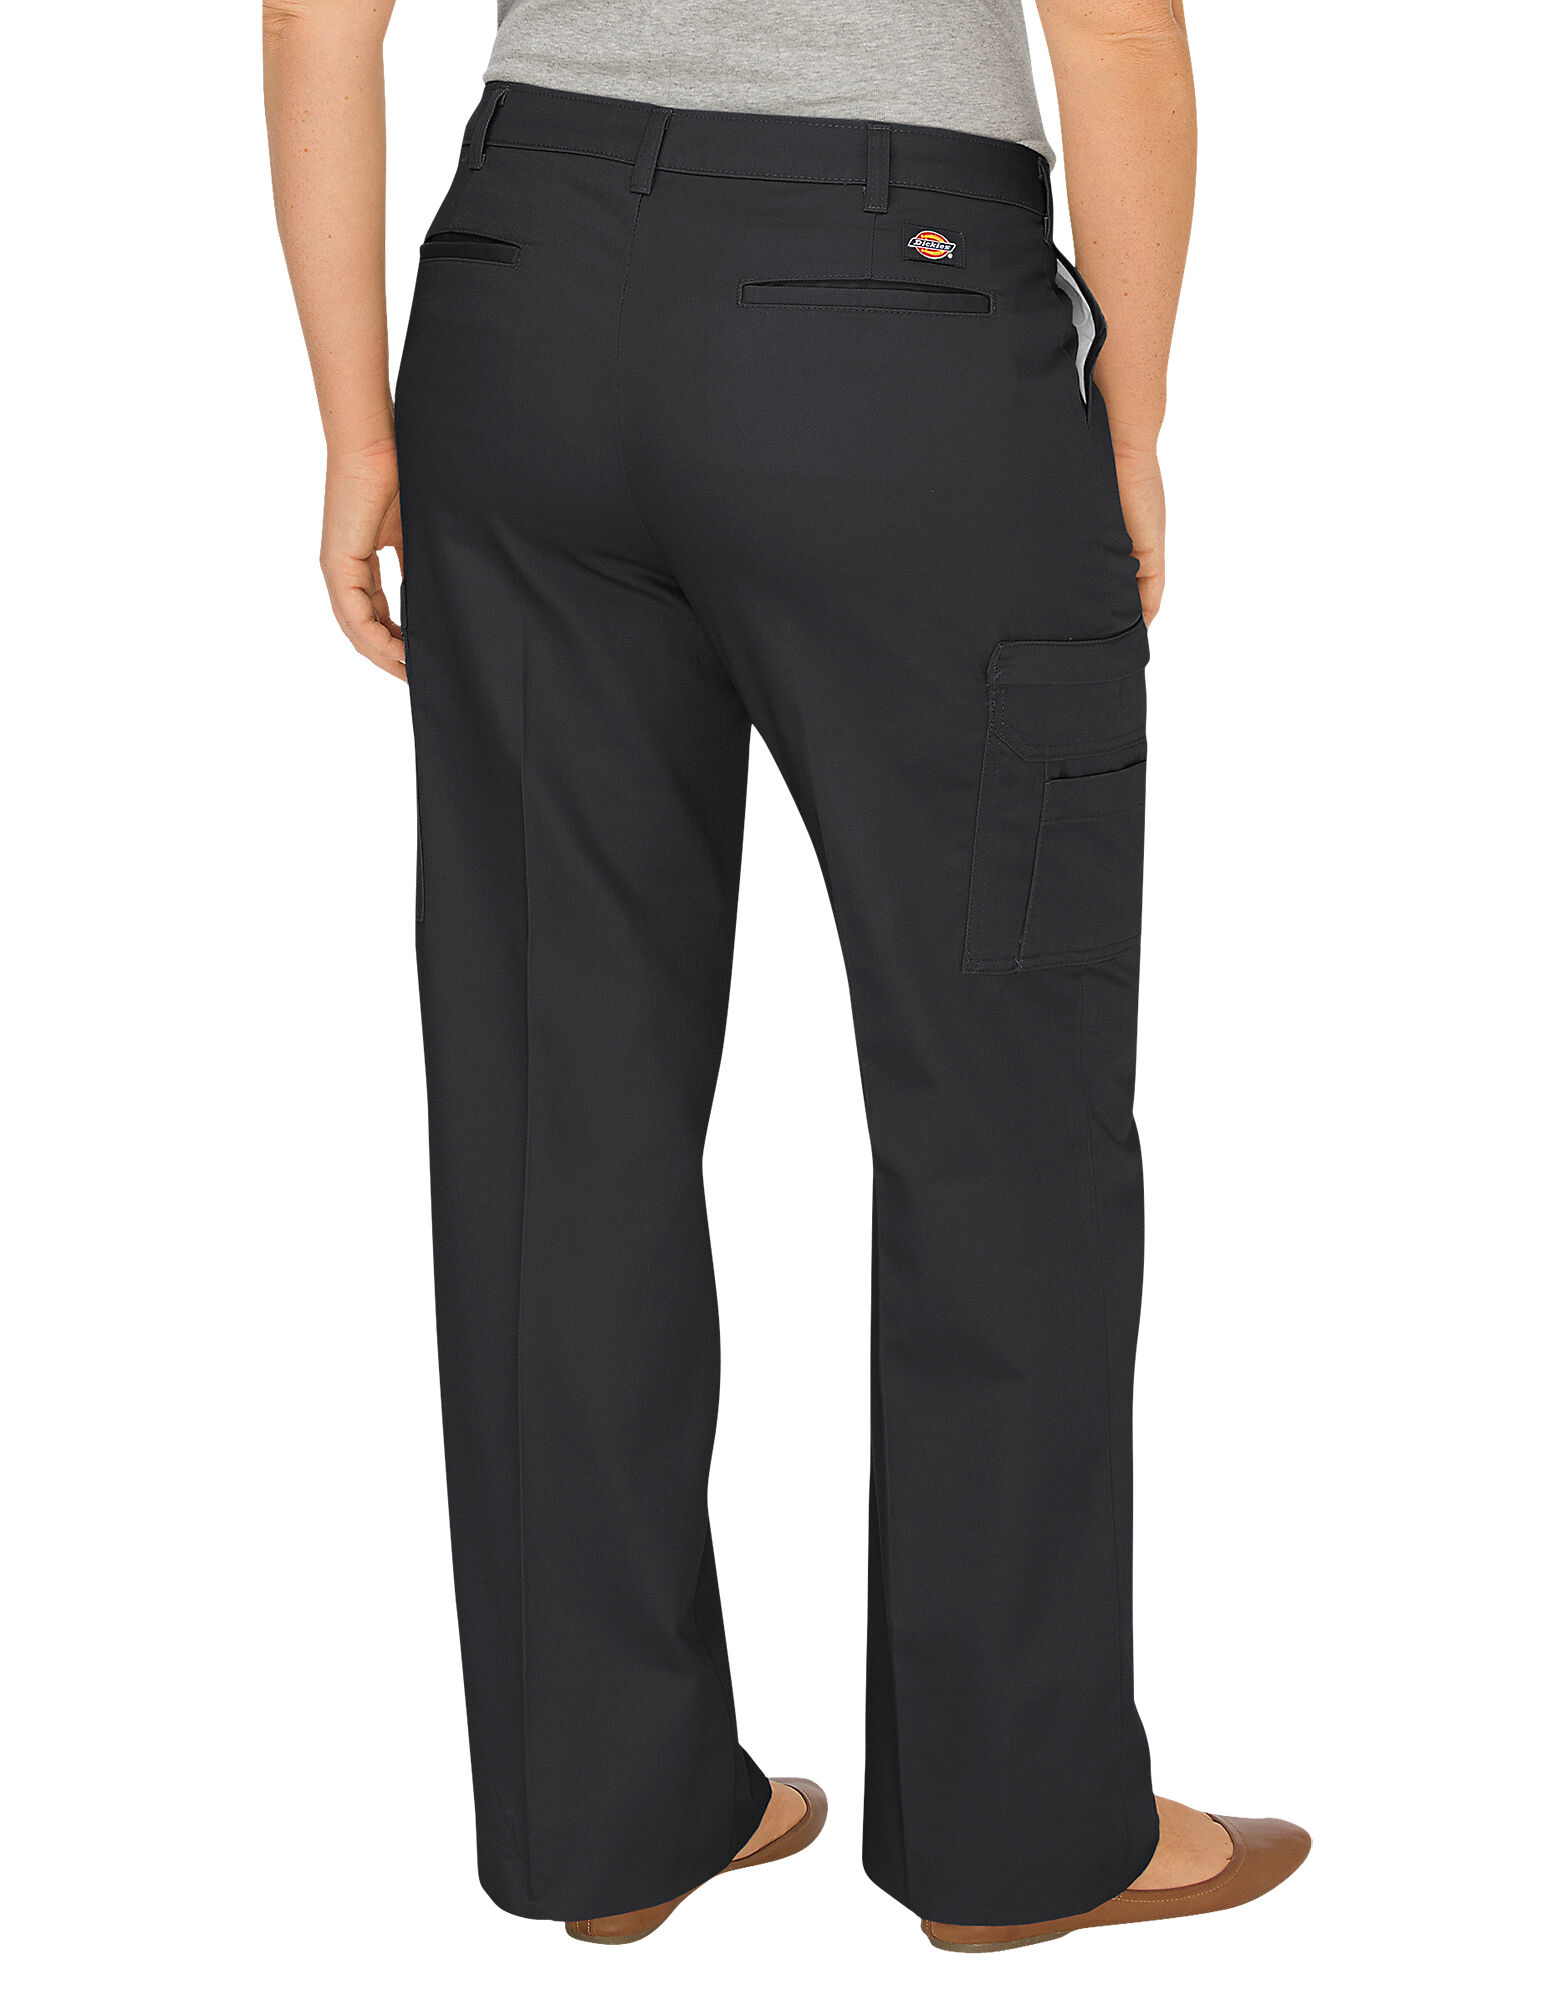 Women's Relaxed Fit Straight Leg Cargo Pants (Plus) | Dickies